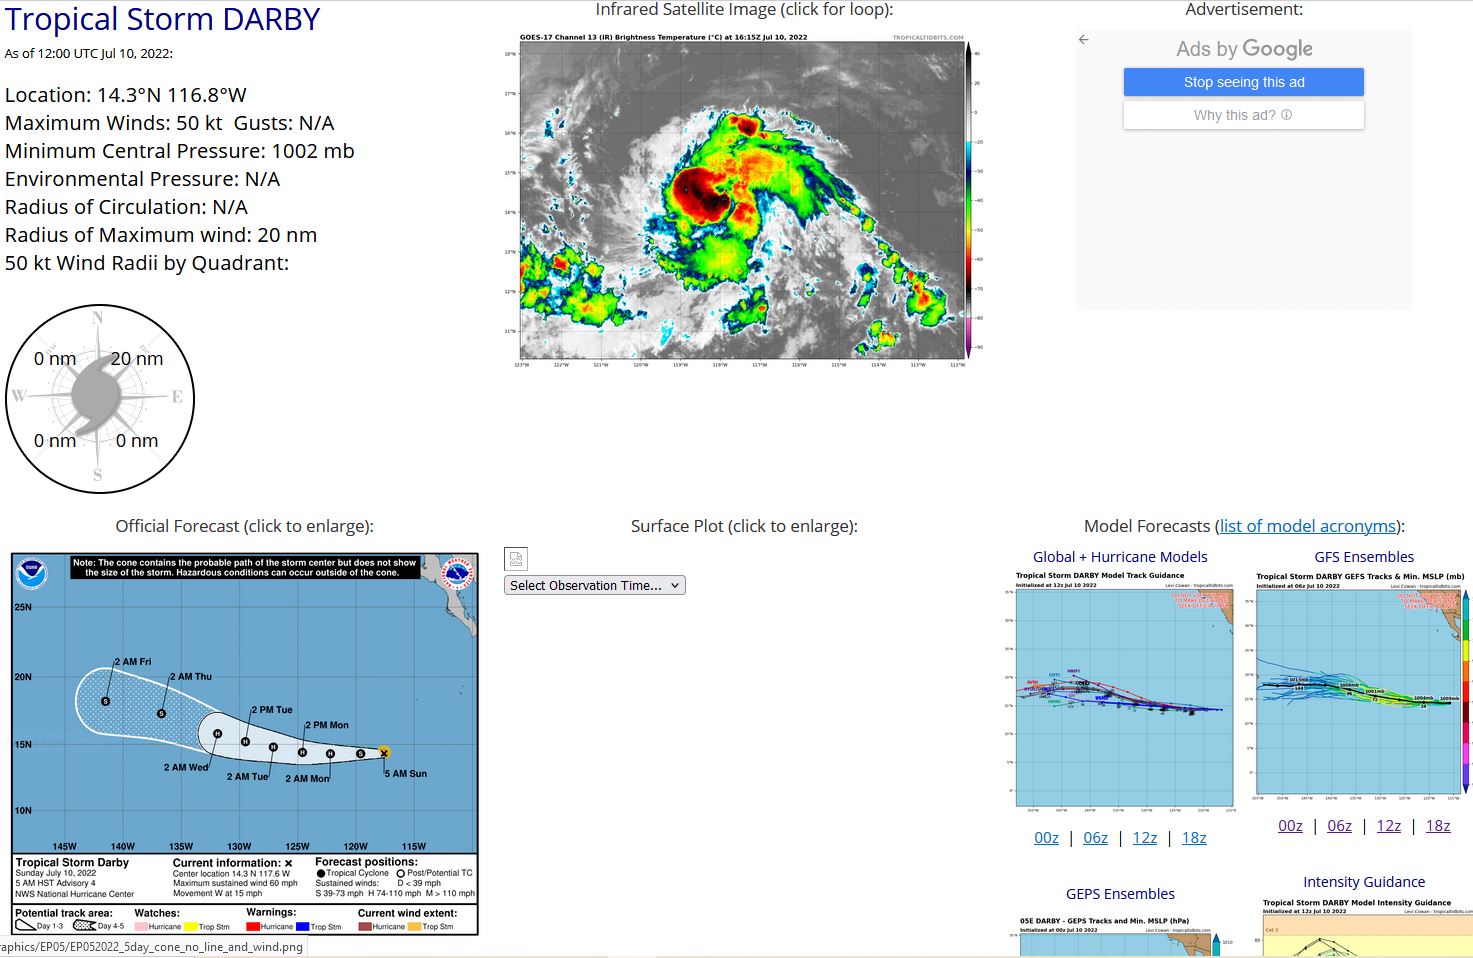 Invest 90W now on the map// TS 05E(DARBY) intensifying, 10/16utc update